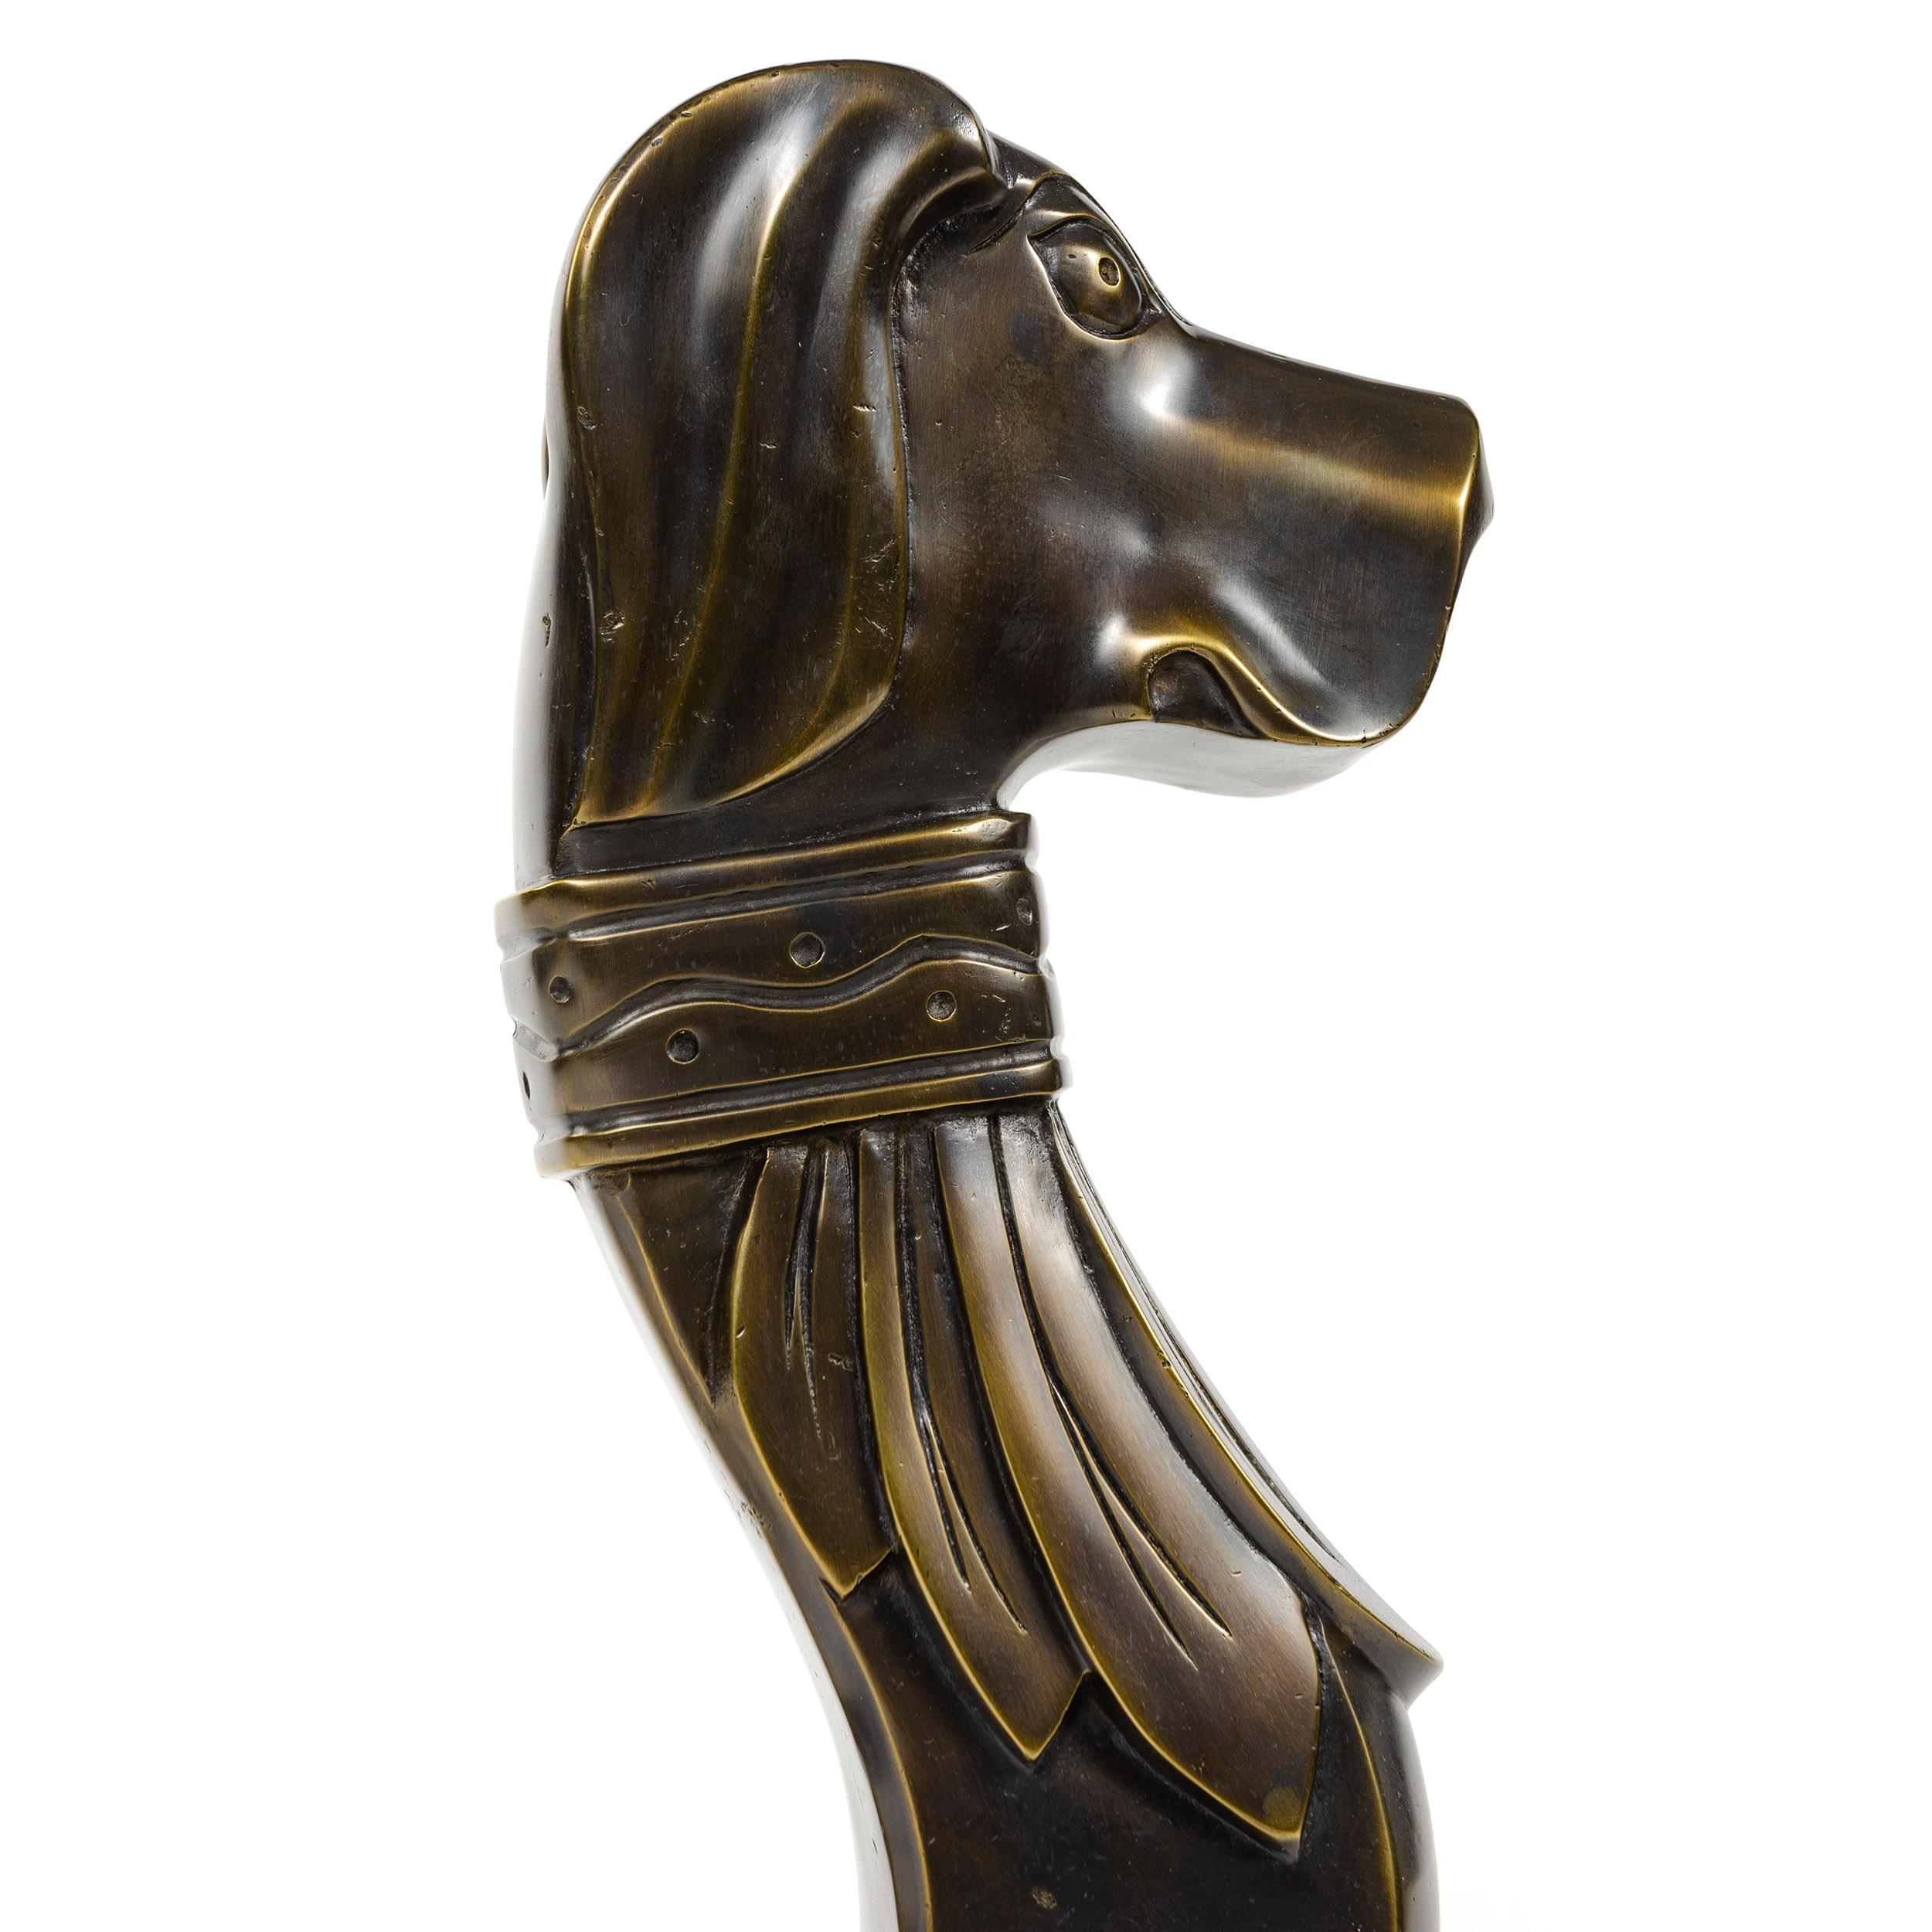 Dachshund Andirons In Excellent Condition For Sale In Sagaponack, NY